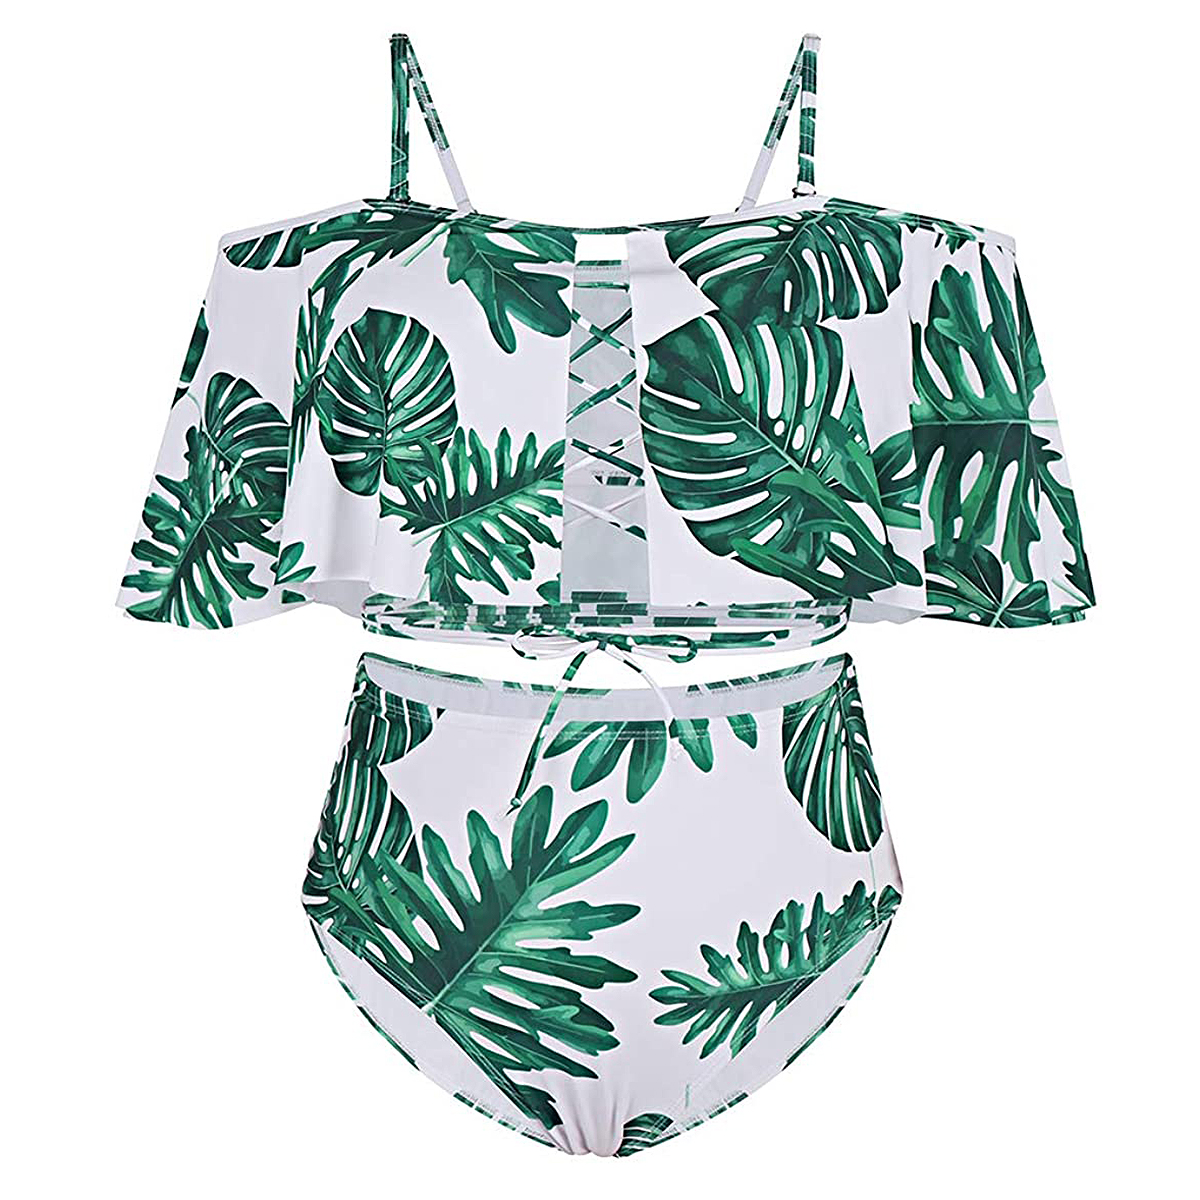 Flattering and Slimming Swimsuits for Spring/Summer 2021